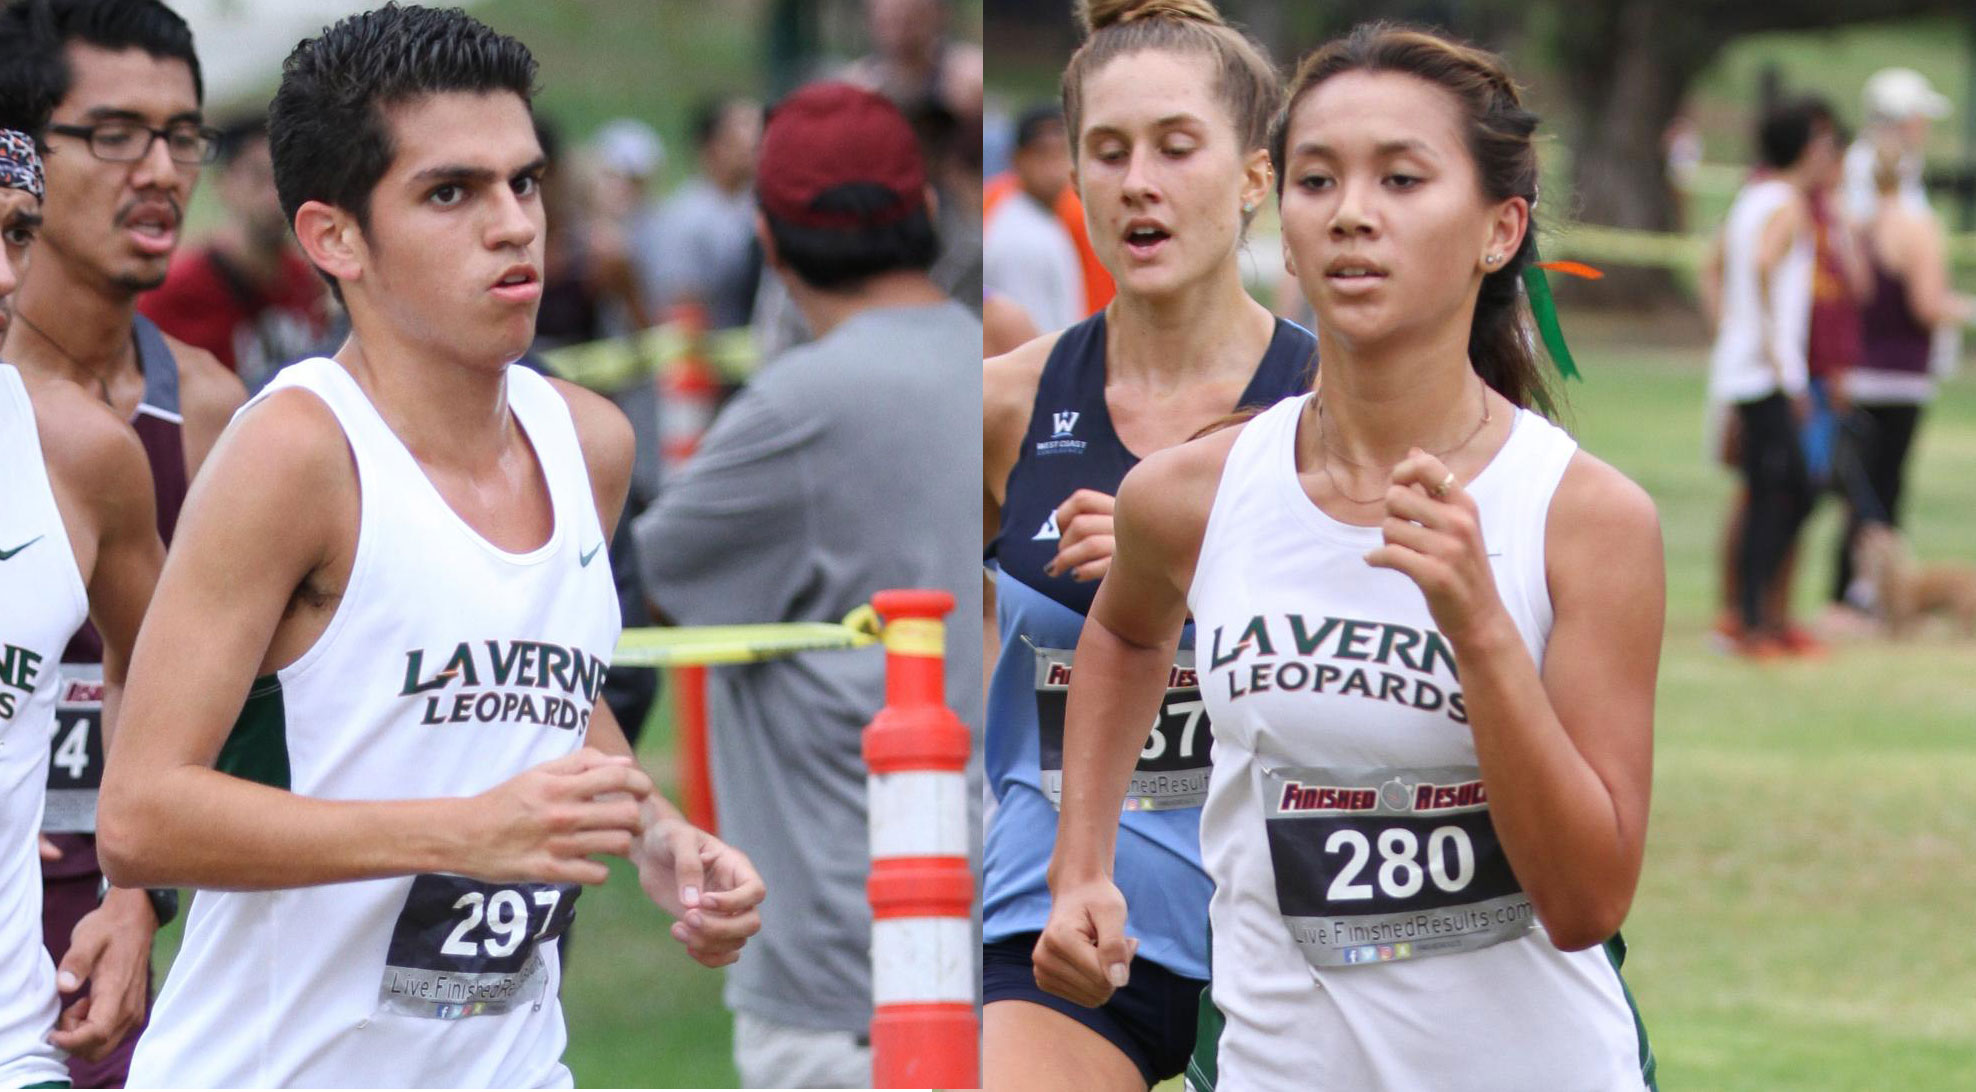 Cross Country opens season in Claremont